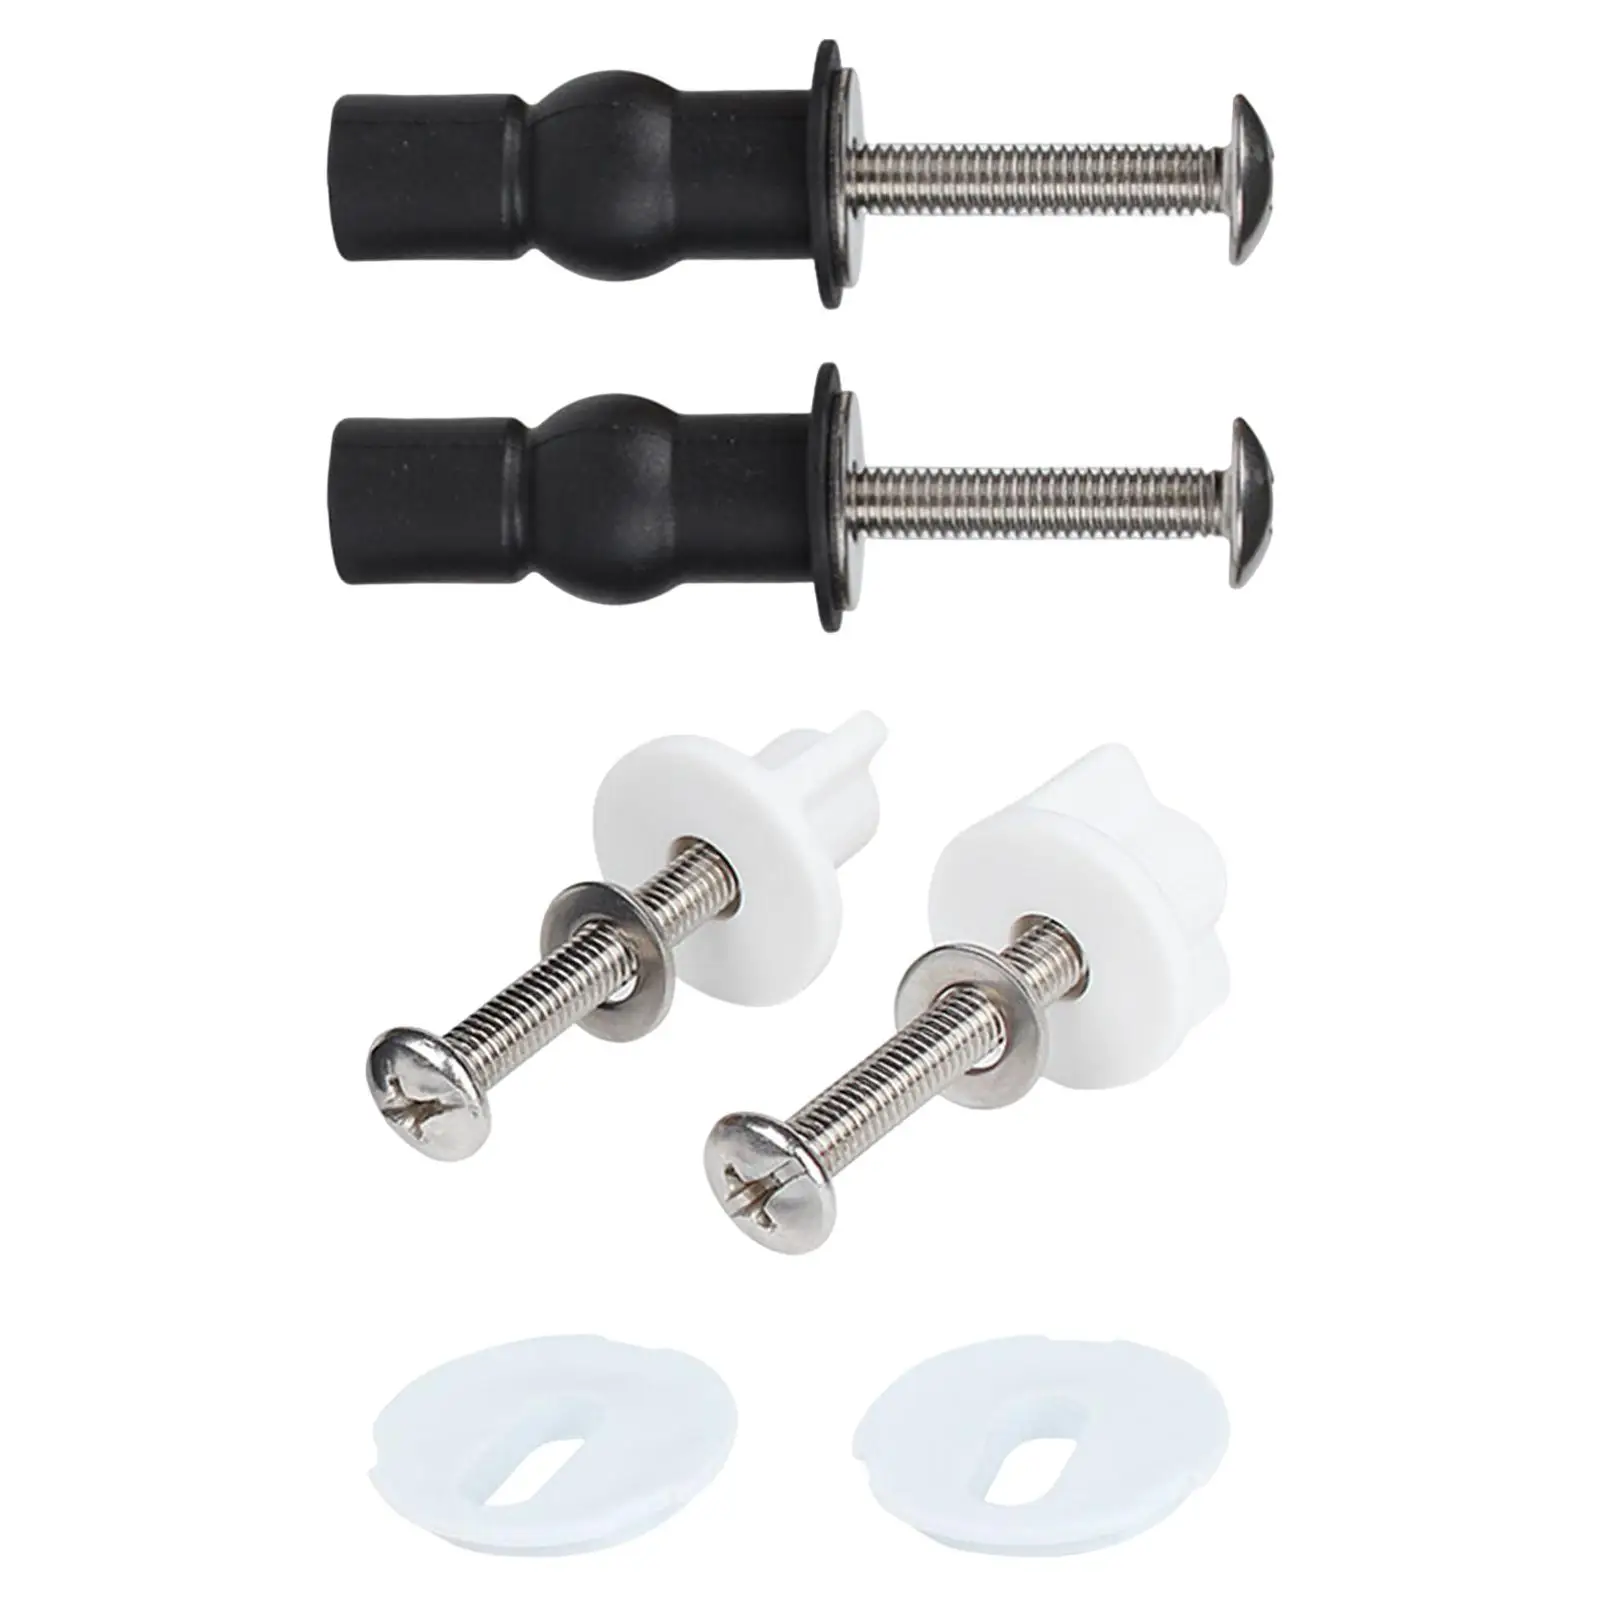 2Pcs Toilet Seat Screws Bolts Nuts and Metal Washers Replacement Parts Toilet Bolts Universal Top Mounted Toilet Seat Hinges